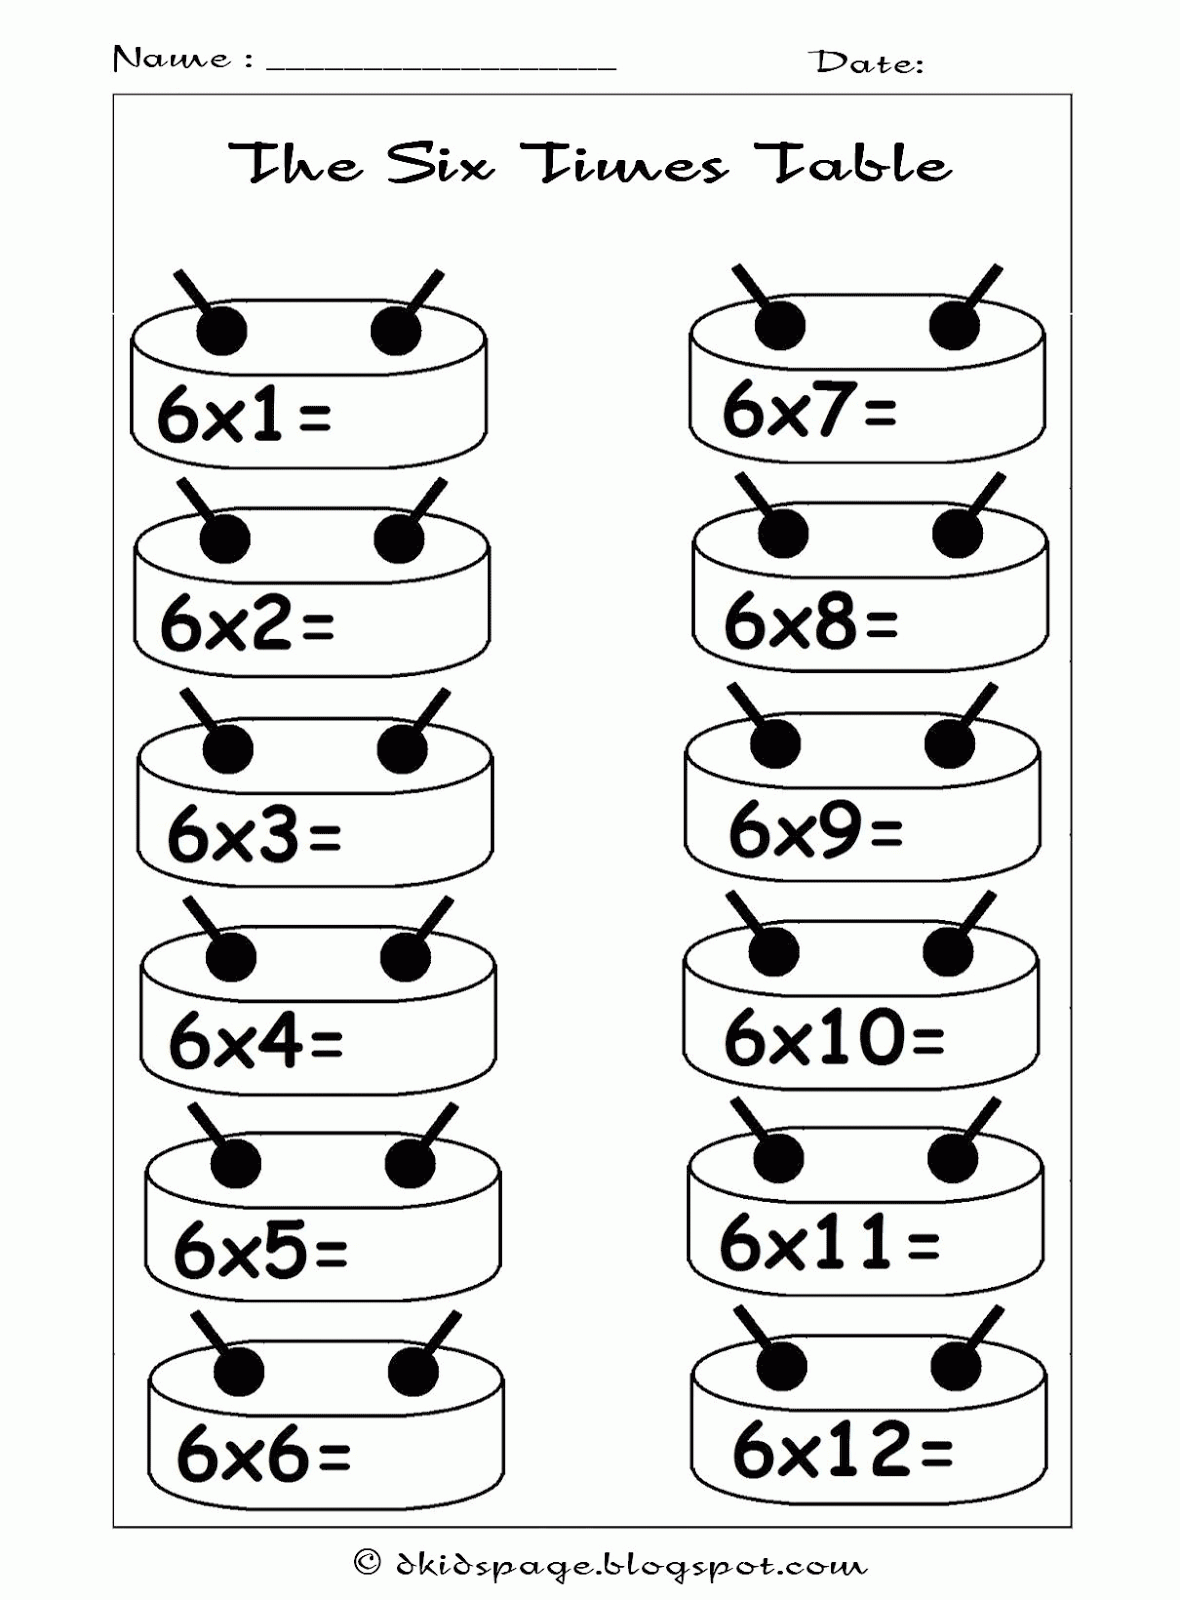 Kids Page: 6 Times Tables Worksheets | Maths Worksheets